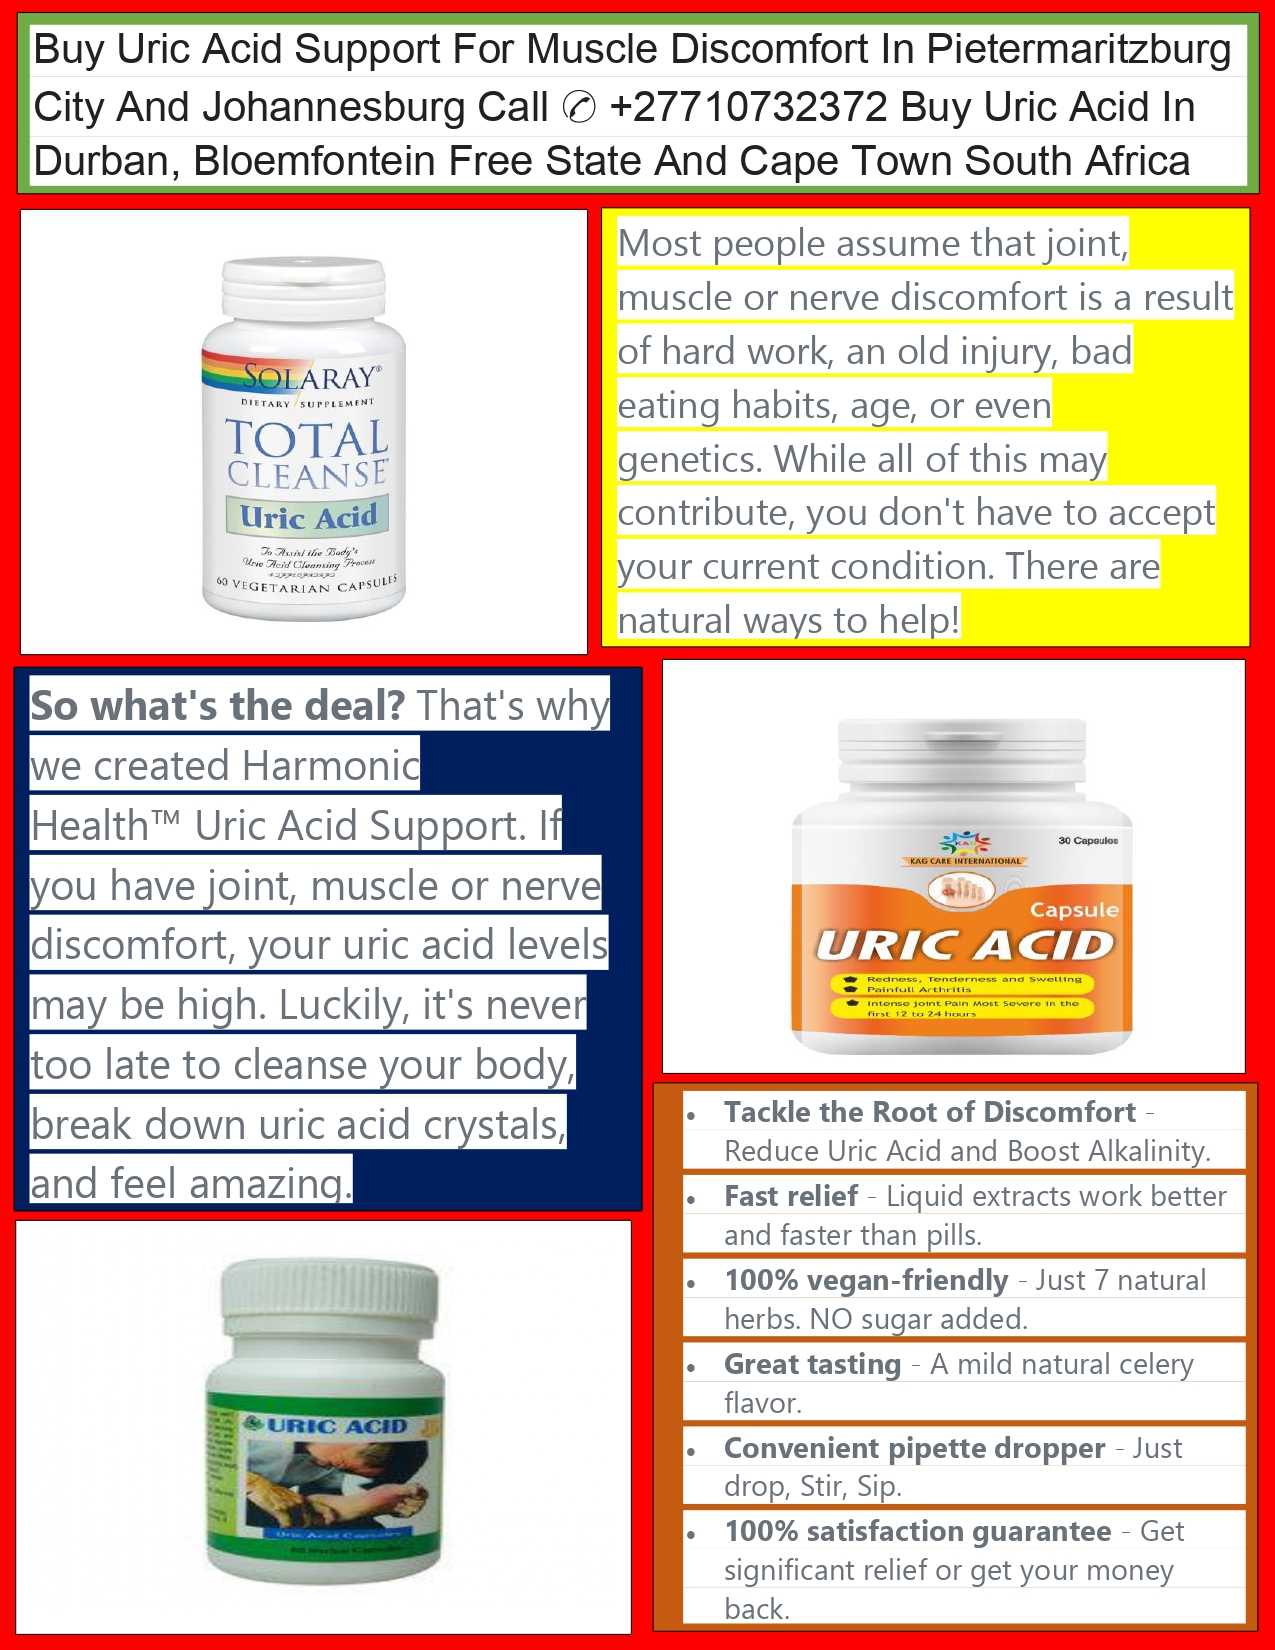 Buy Uric Acid Support For Muscle Discomfort In Pietermaritzburg And Johannesburg Call ✆ +27710732372 Buy Uric Acid In Gelgel Town In Bali Indonesia, Durban And Cape Town South Africa